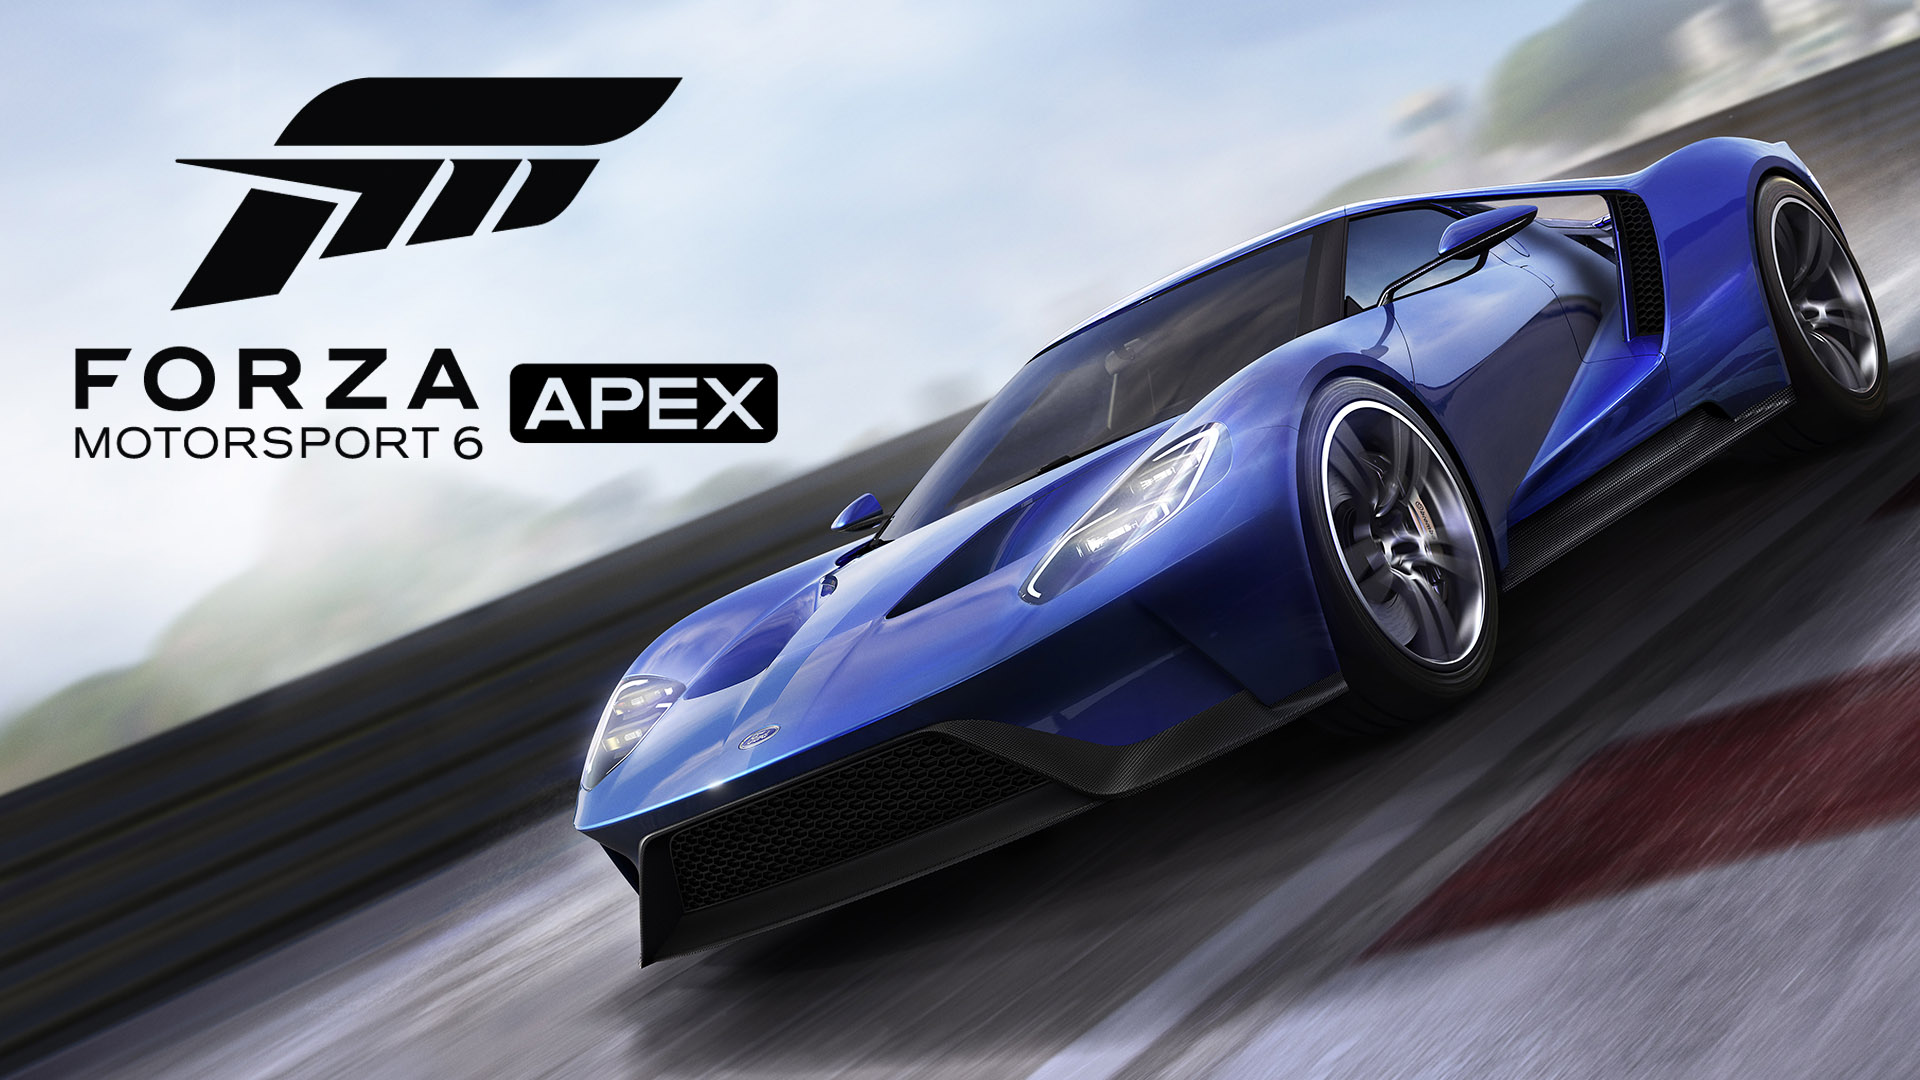 Forza Motorsport 6: Apex PC Download Free Full Game For windows